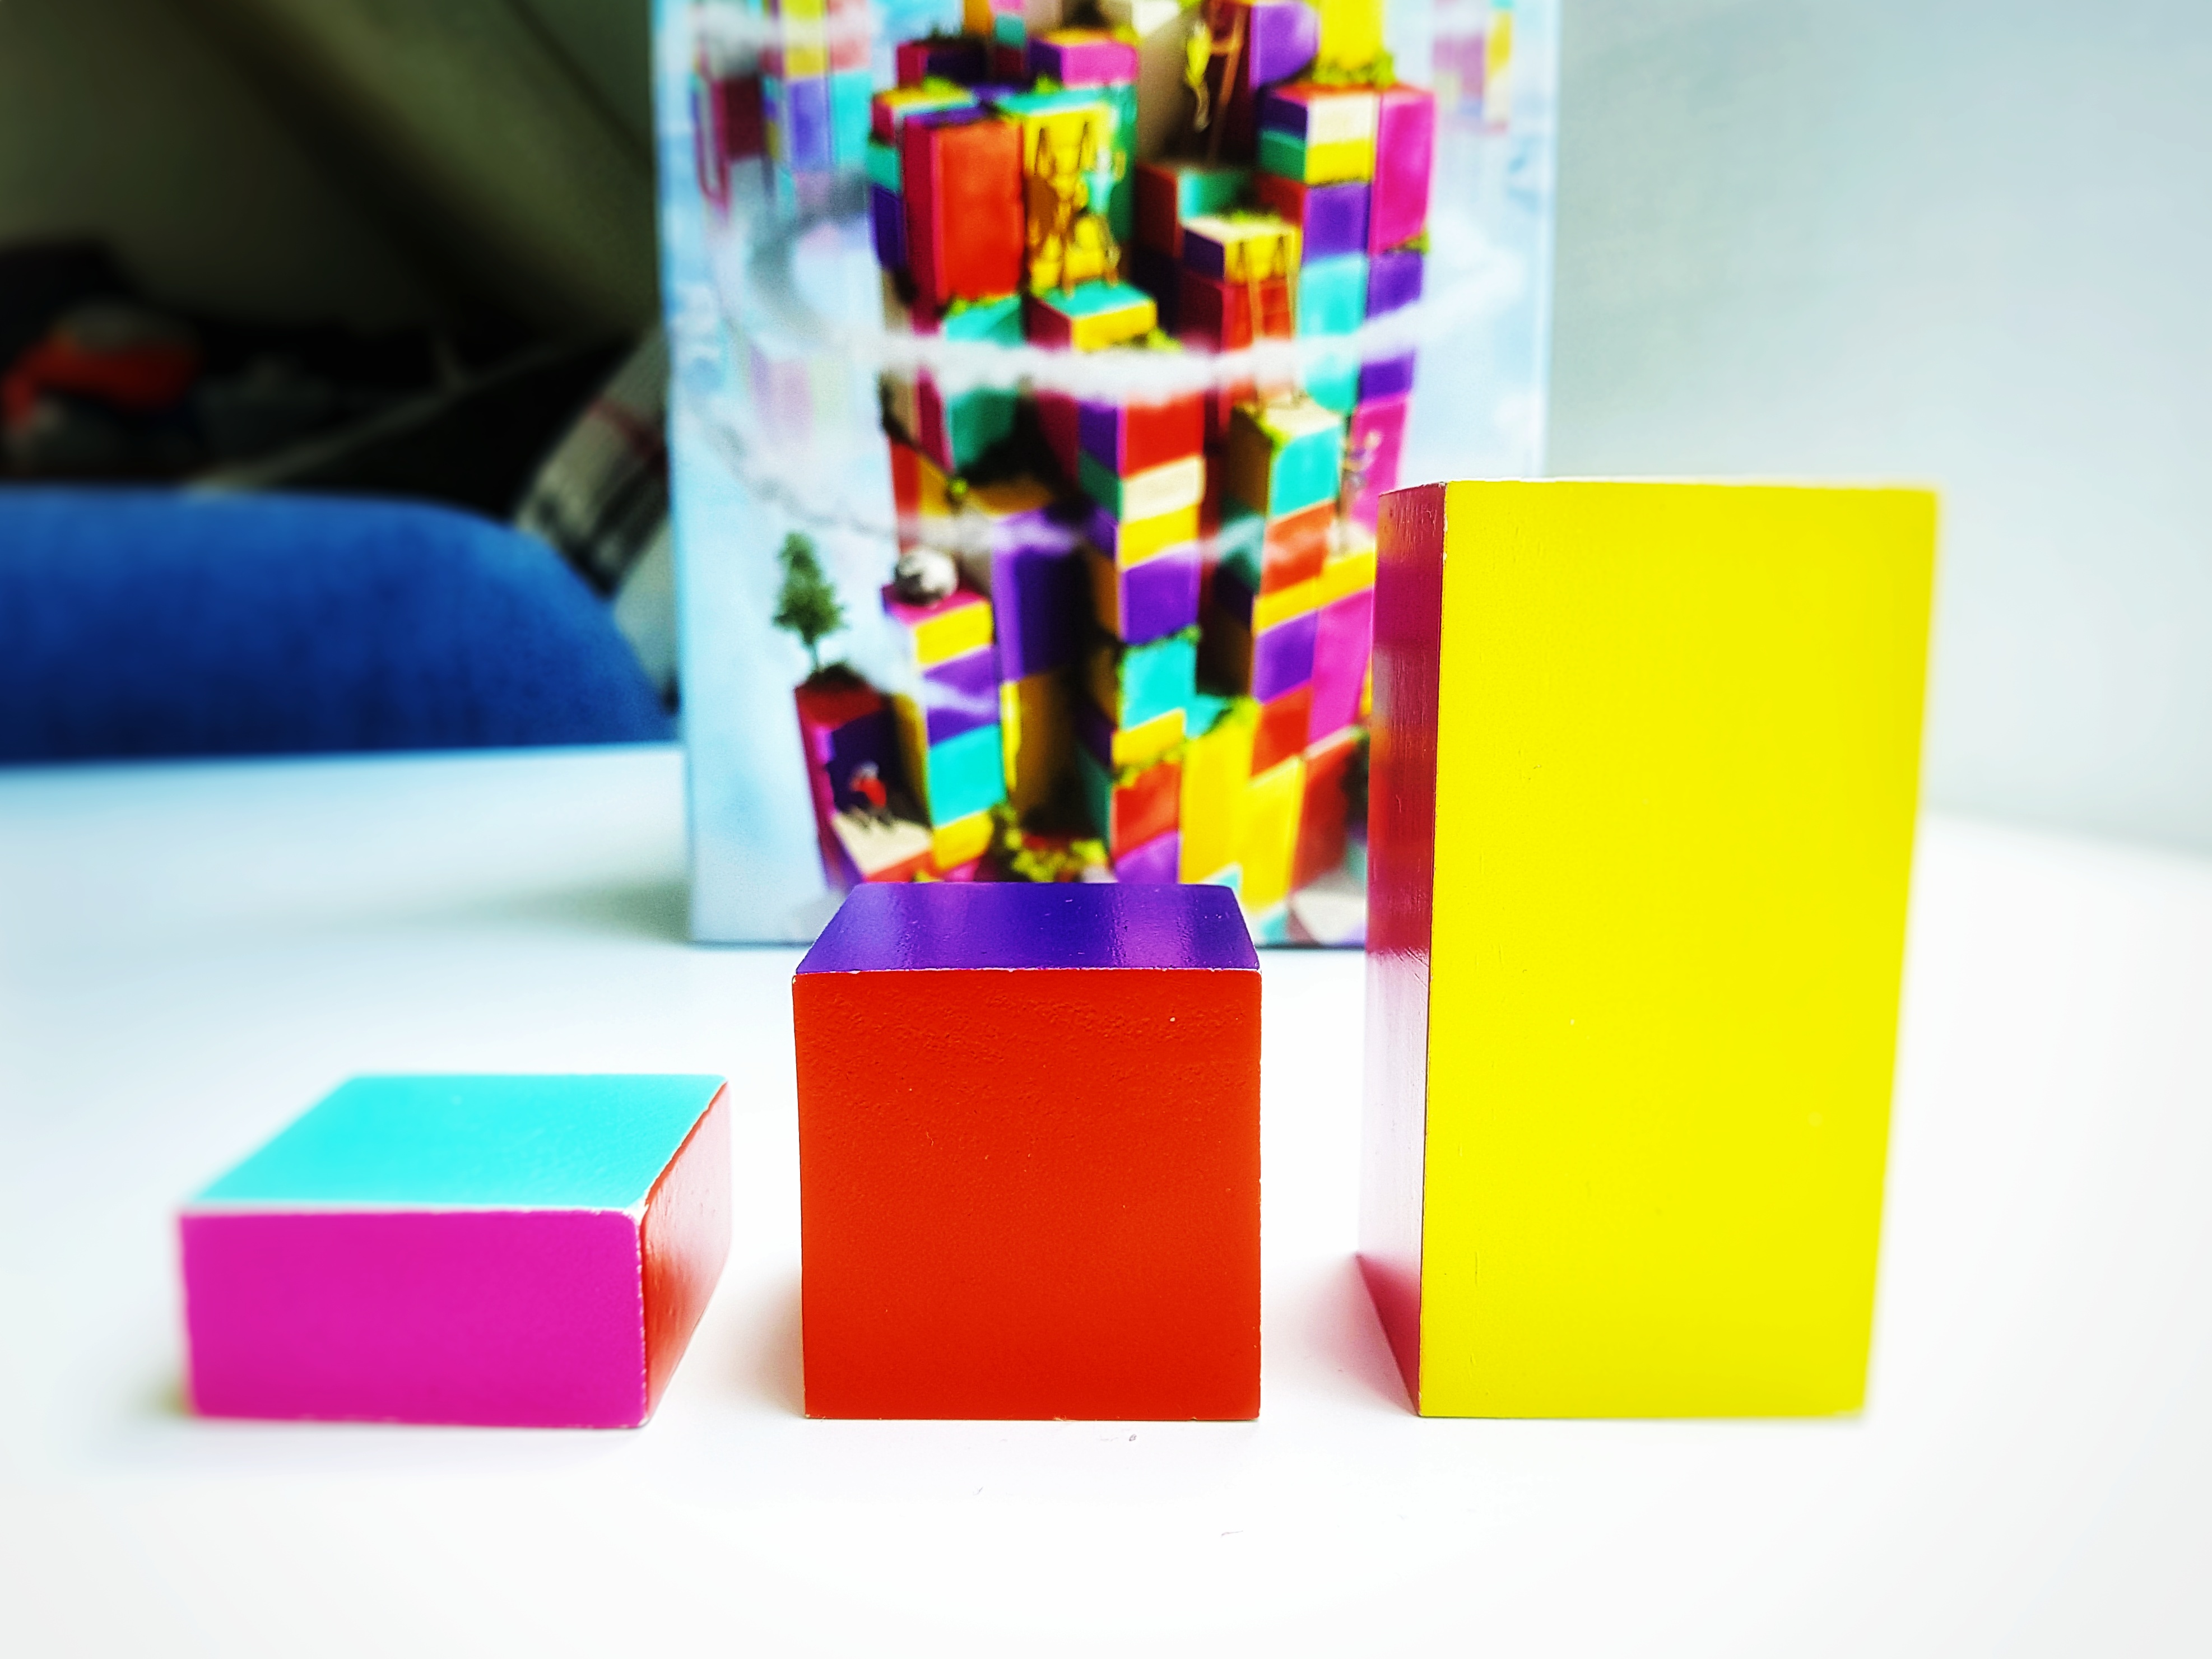 The Climbers by Capstone Games and Simply Complex blocks of wood in three heights